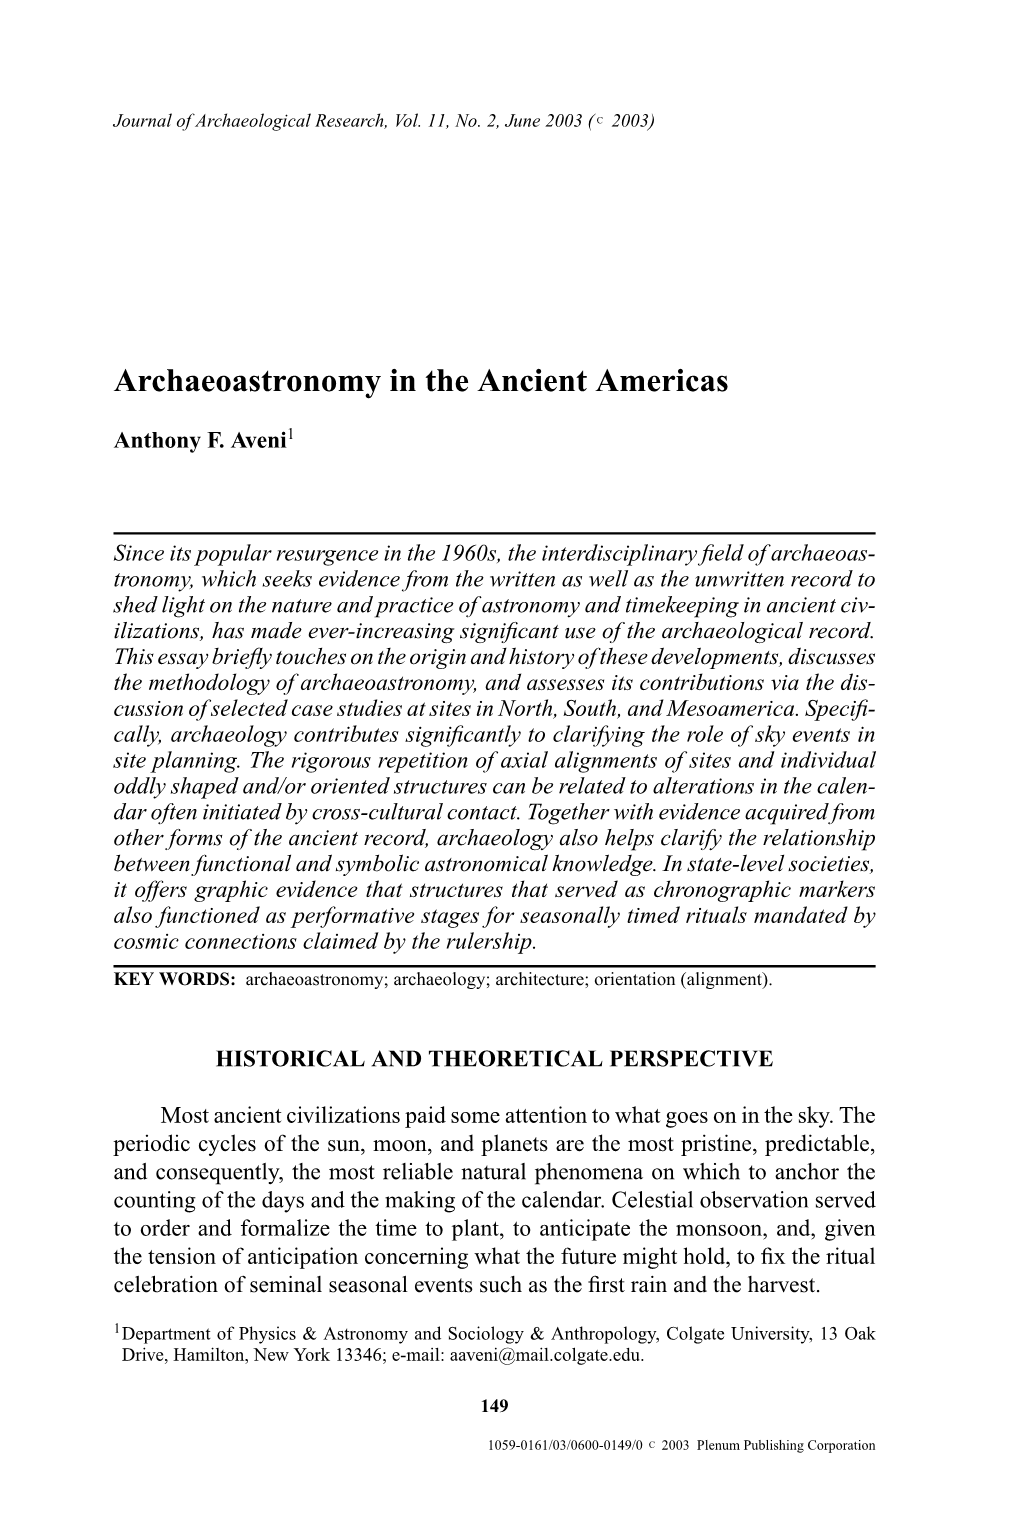 Archaeoastronomy in the Ancient Americas